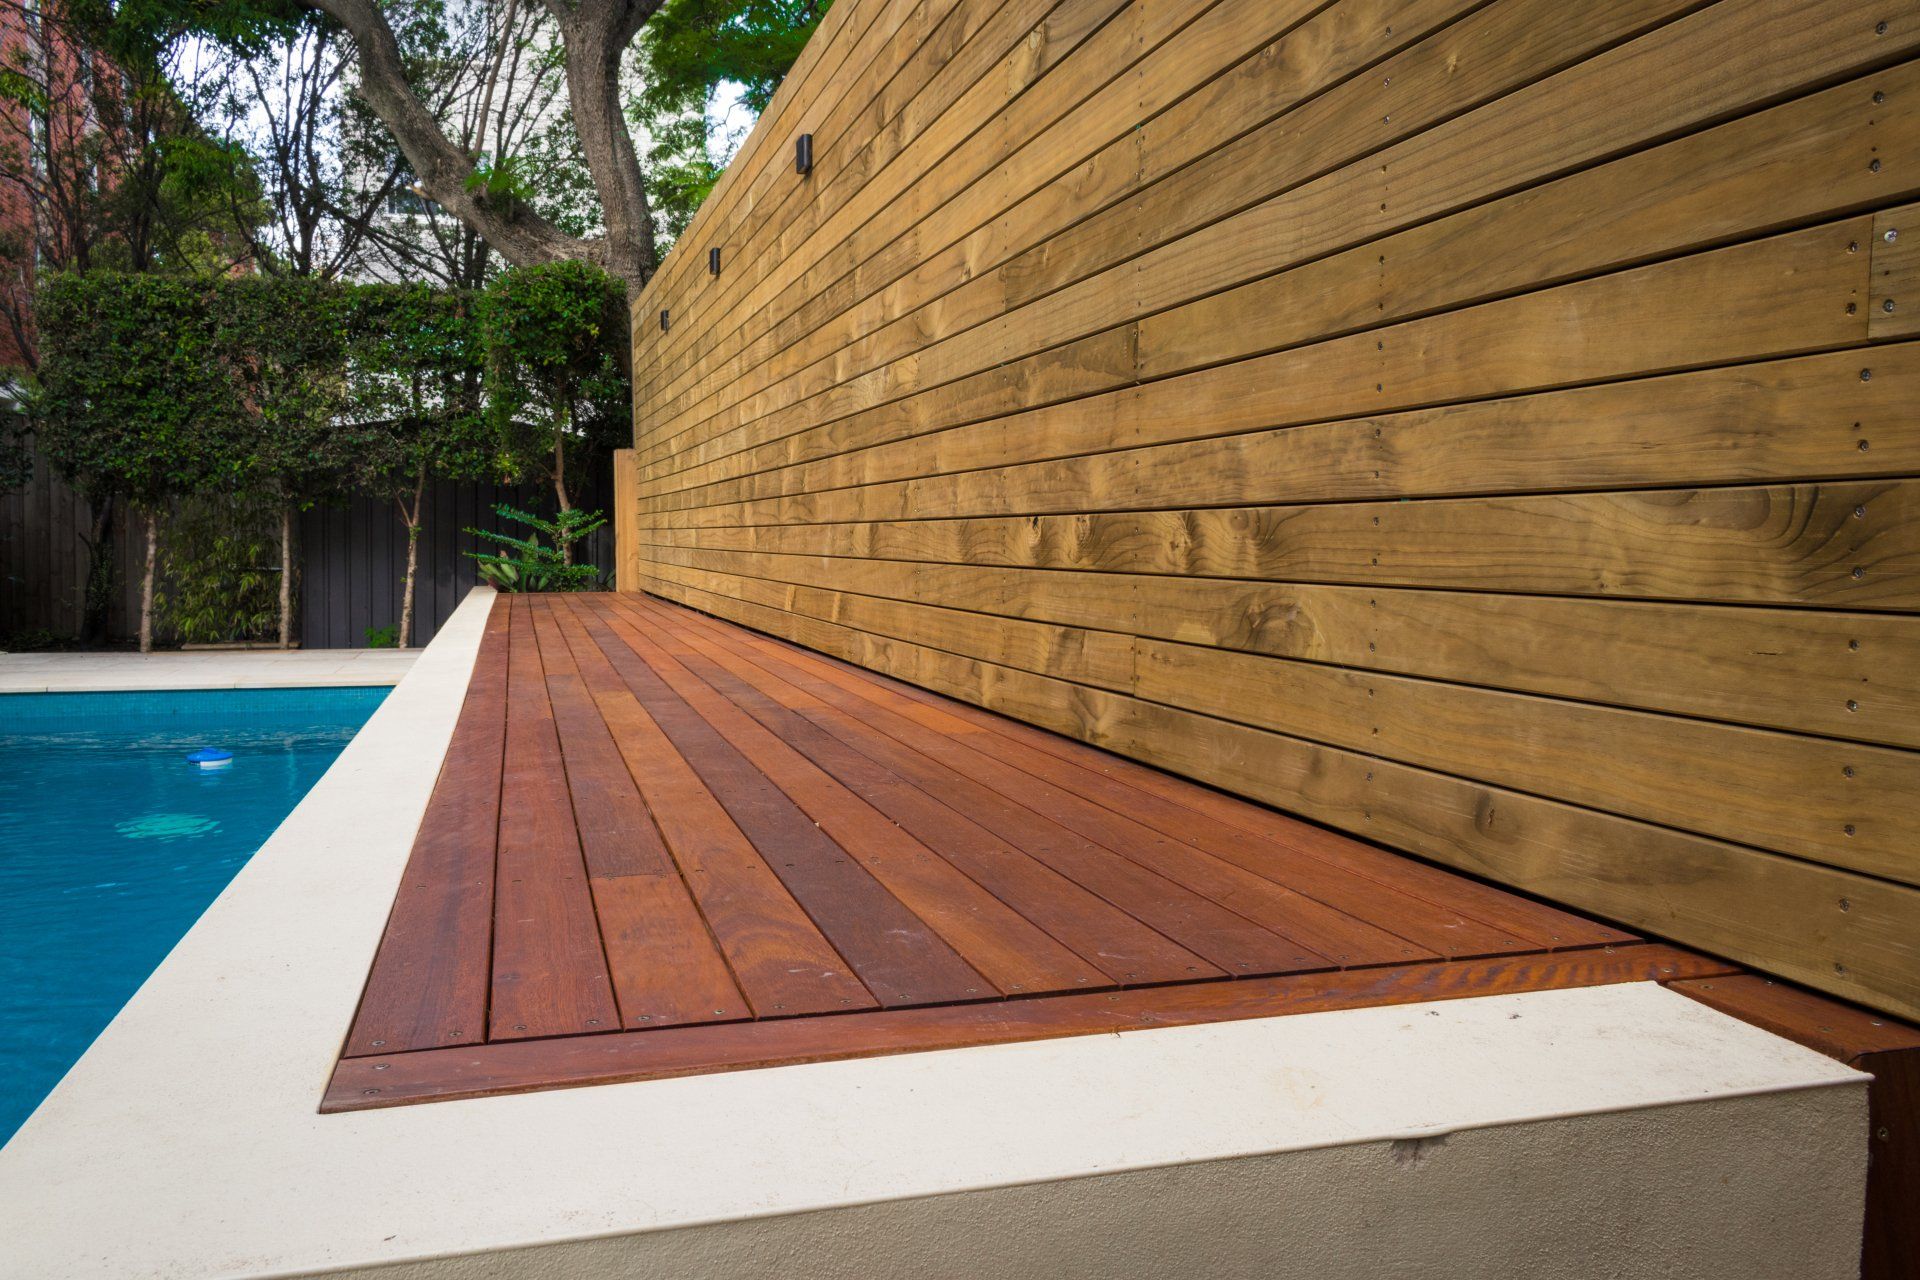 Timber decking for pool